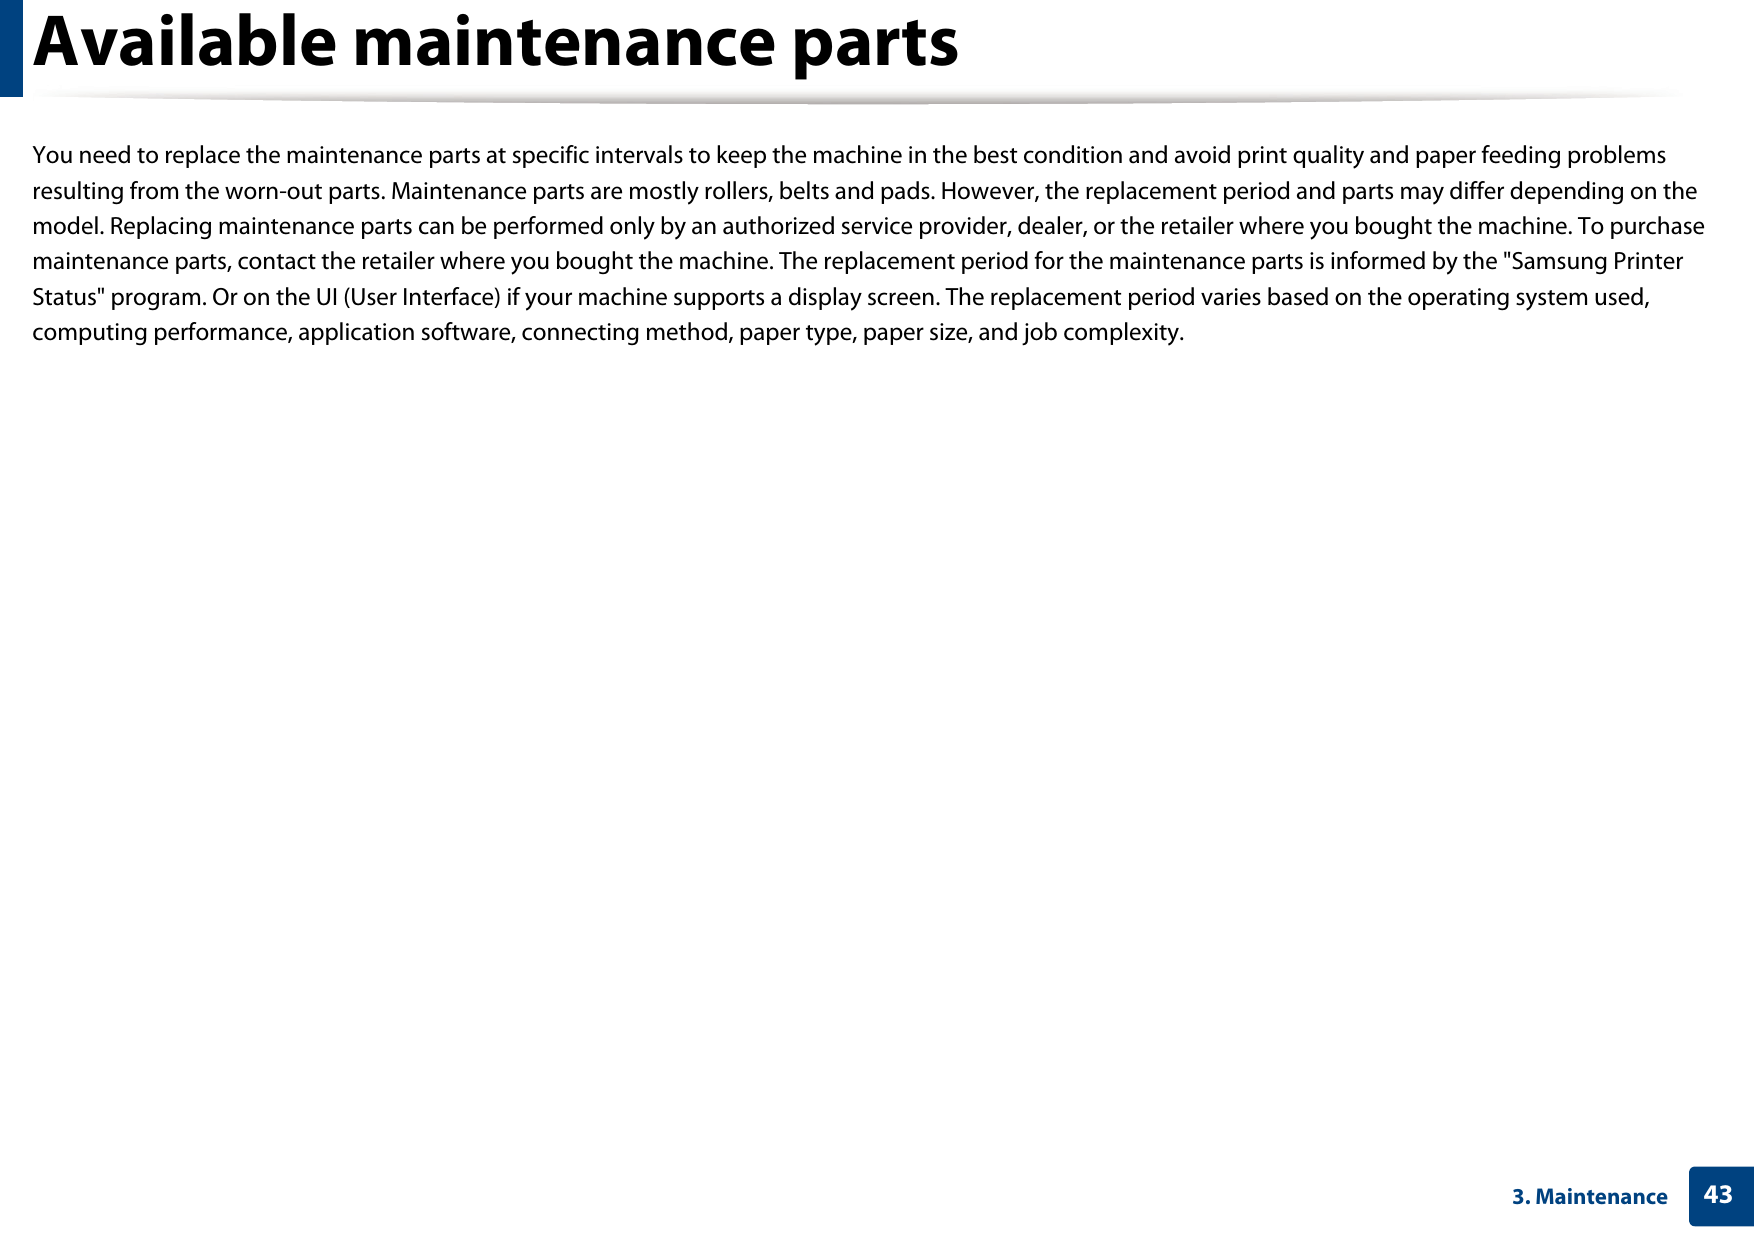 433. MaintenanceAvailable maintenance partsYou need to replace the maintenance parts at specific intervals to keep the machine in the best condition and avoid print quality and paper feeding problems resulting from the worn-out parts. Maintenance parts are mostly rollers, belts and pads. However, the replacement period and parts may differ depending on the model. Replacing maintenance parts can be performed only by an authorized service provider, dealer, or the retailer where you bought the machine. To purchase maintenance parts, contact the retailer where you bought the machine. The replacement period for the maintenance parts is informed by the &quot;Samsung Printer Status&quot; program. Or on the UI (User Interface) if your machine supports a display screen. The replacement period varies based on the operating system used, computing performance, application software, connecting method, paper type, paper size, and job complexity.